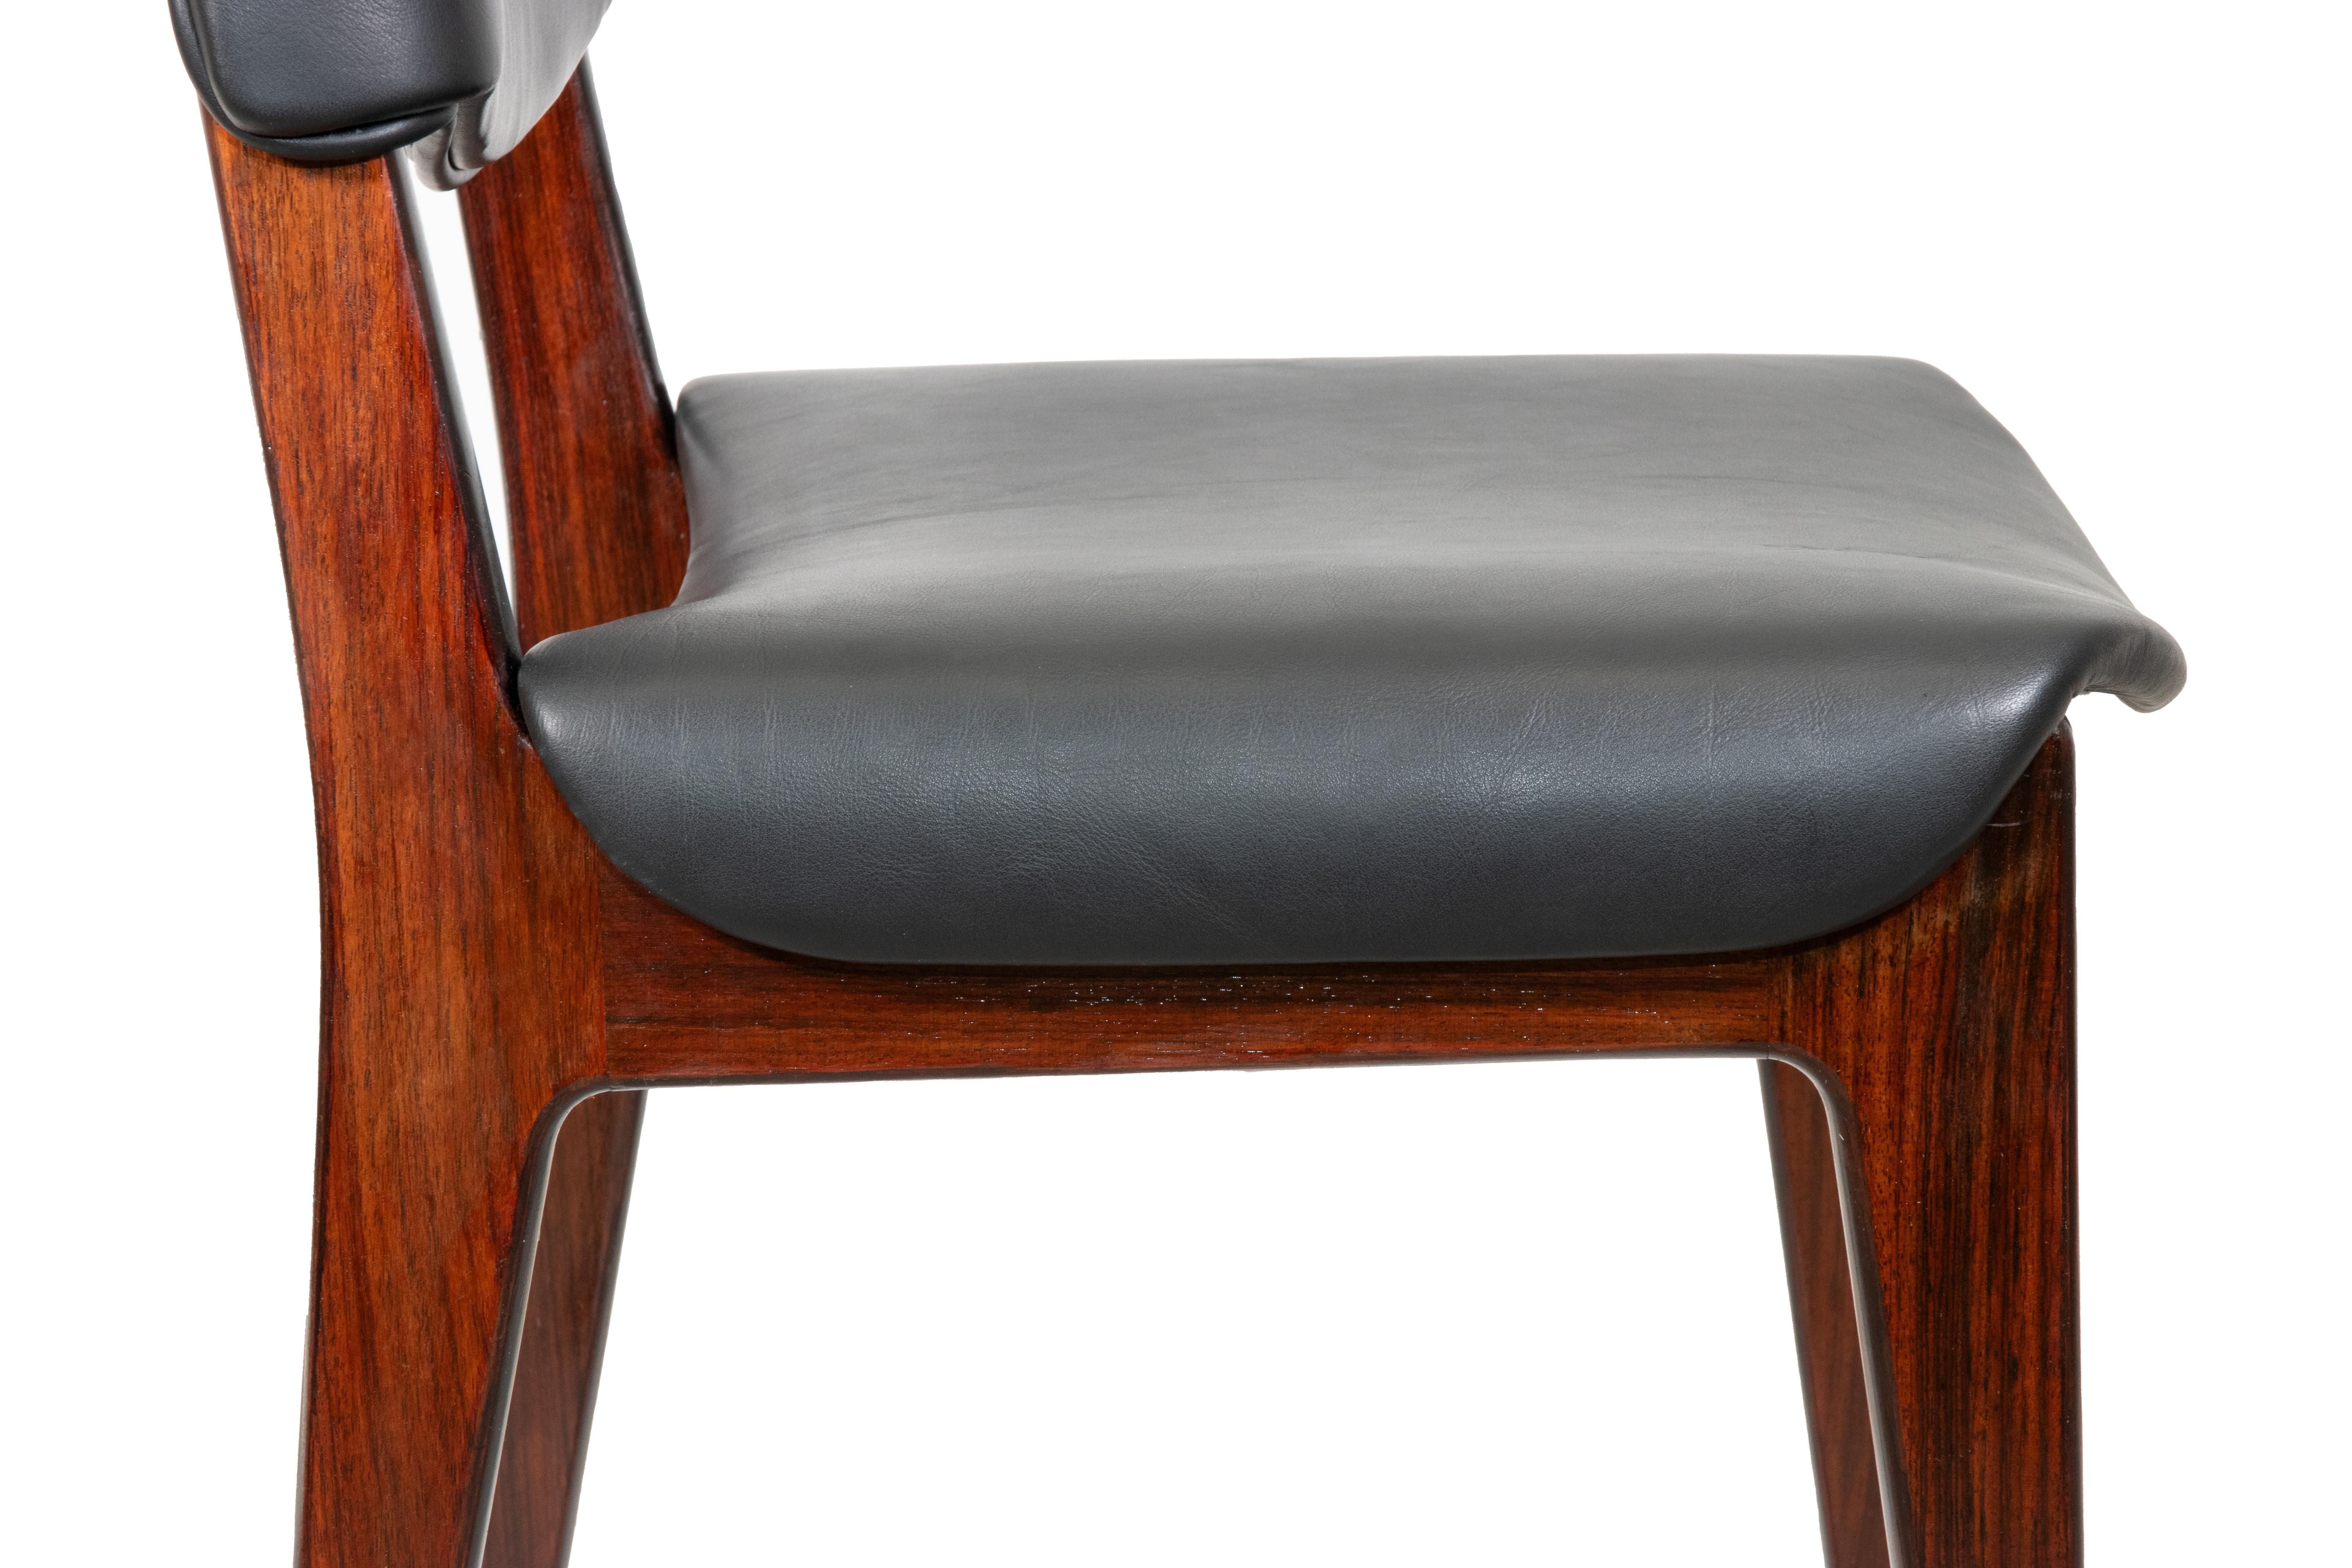 Mid-20th Century Six Vintage Chairs Wood and Leather by Gio Ponti for MIM, 1950s